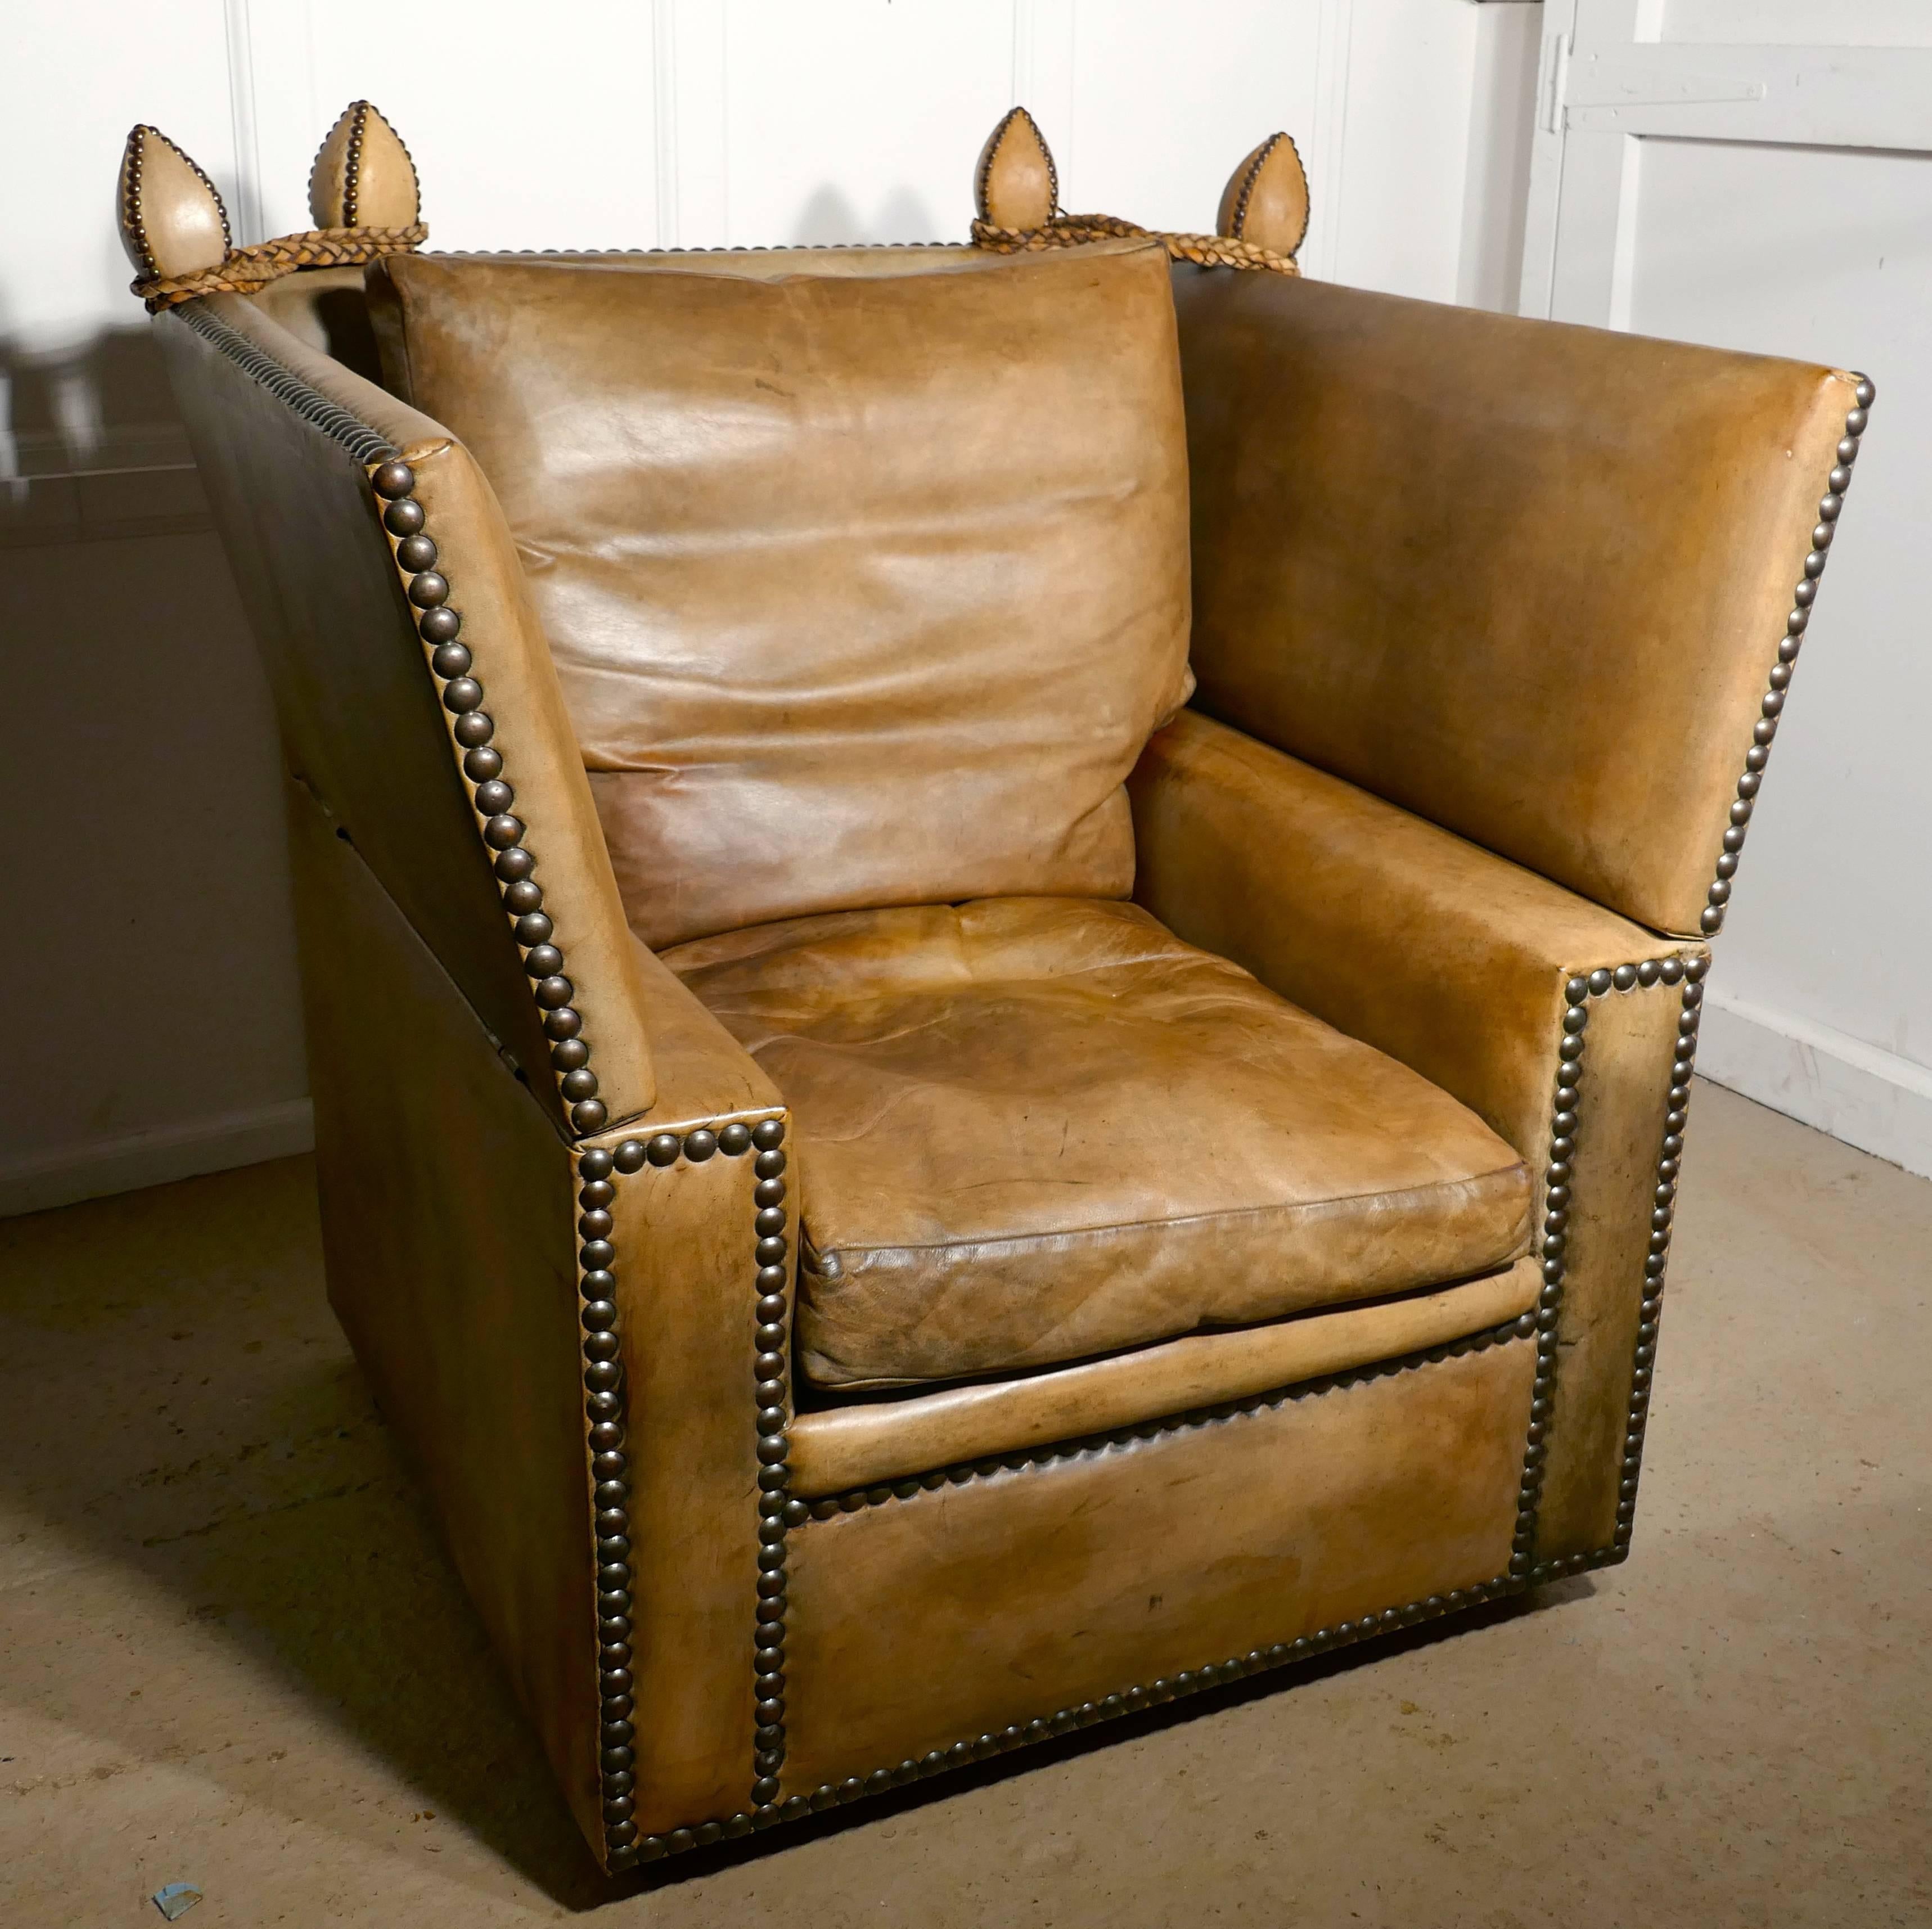 This is a very Large armchair, it is upholstered in its original leather with large brass studs, the leather is very thick heavy quality, and is very soft and pliable. The leather has faded with age and combined with the soft feather cushions it is